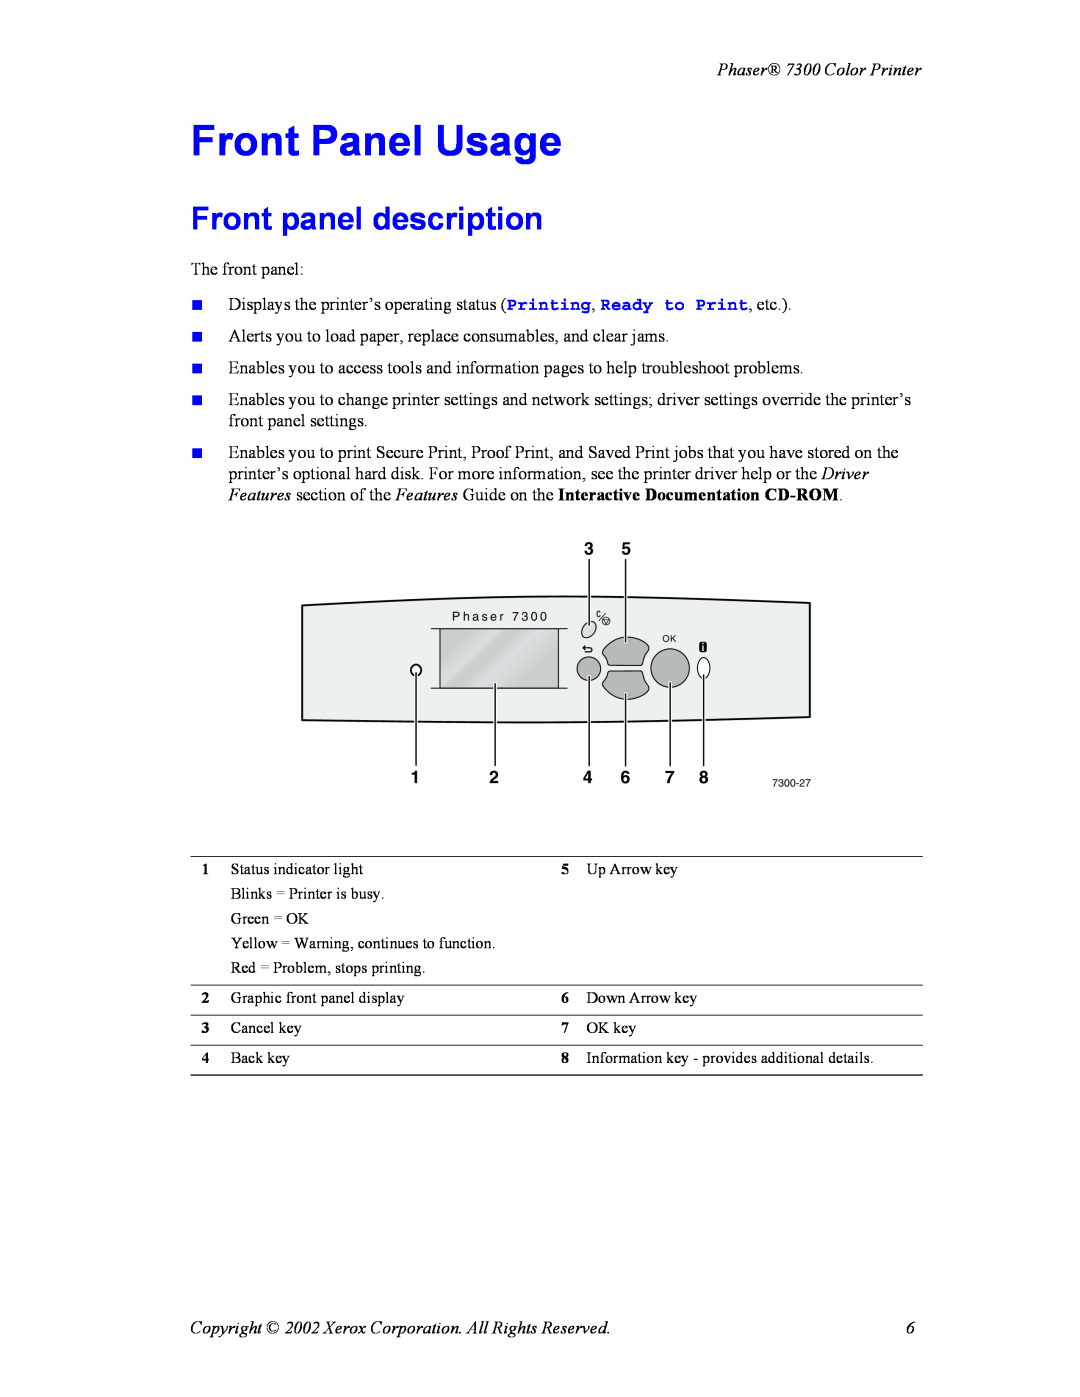 Xerox manual Front panel description, Phaser 7300 Color Printer, Front Panel Usage 